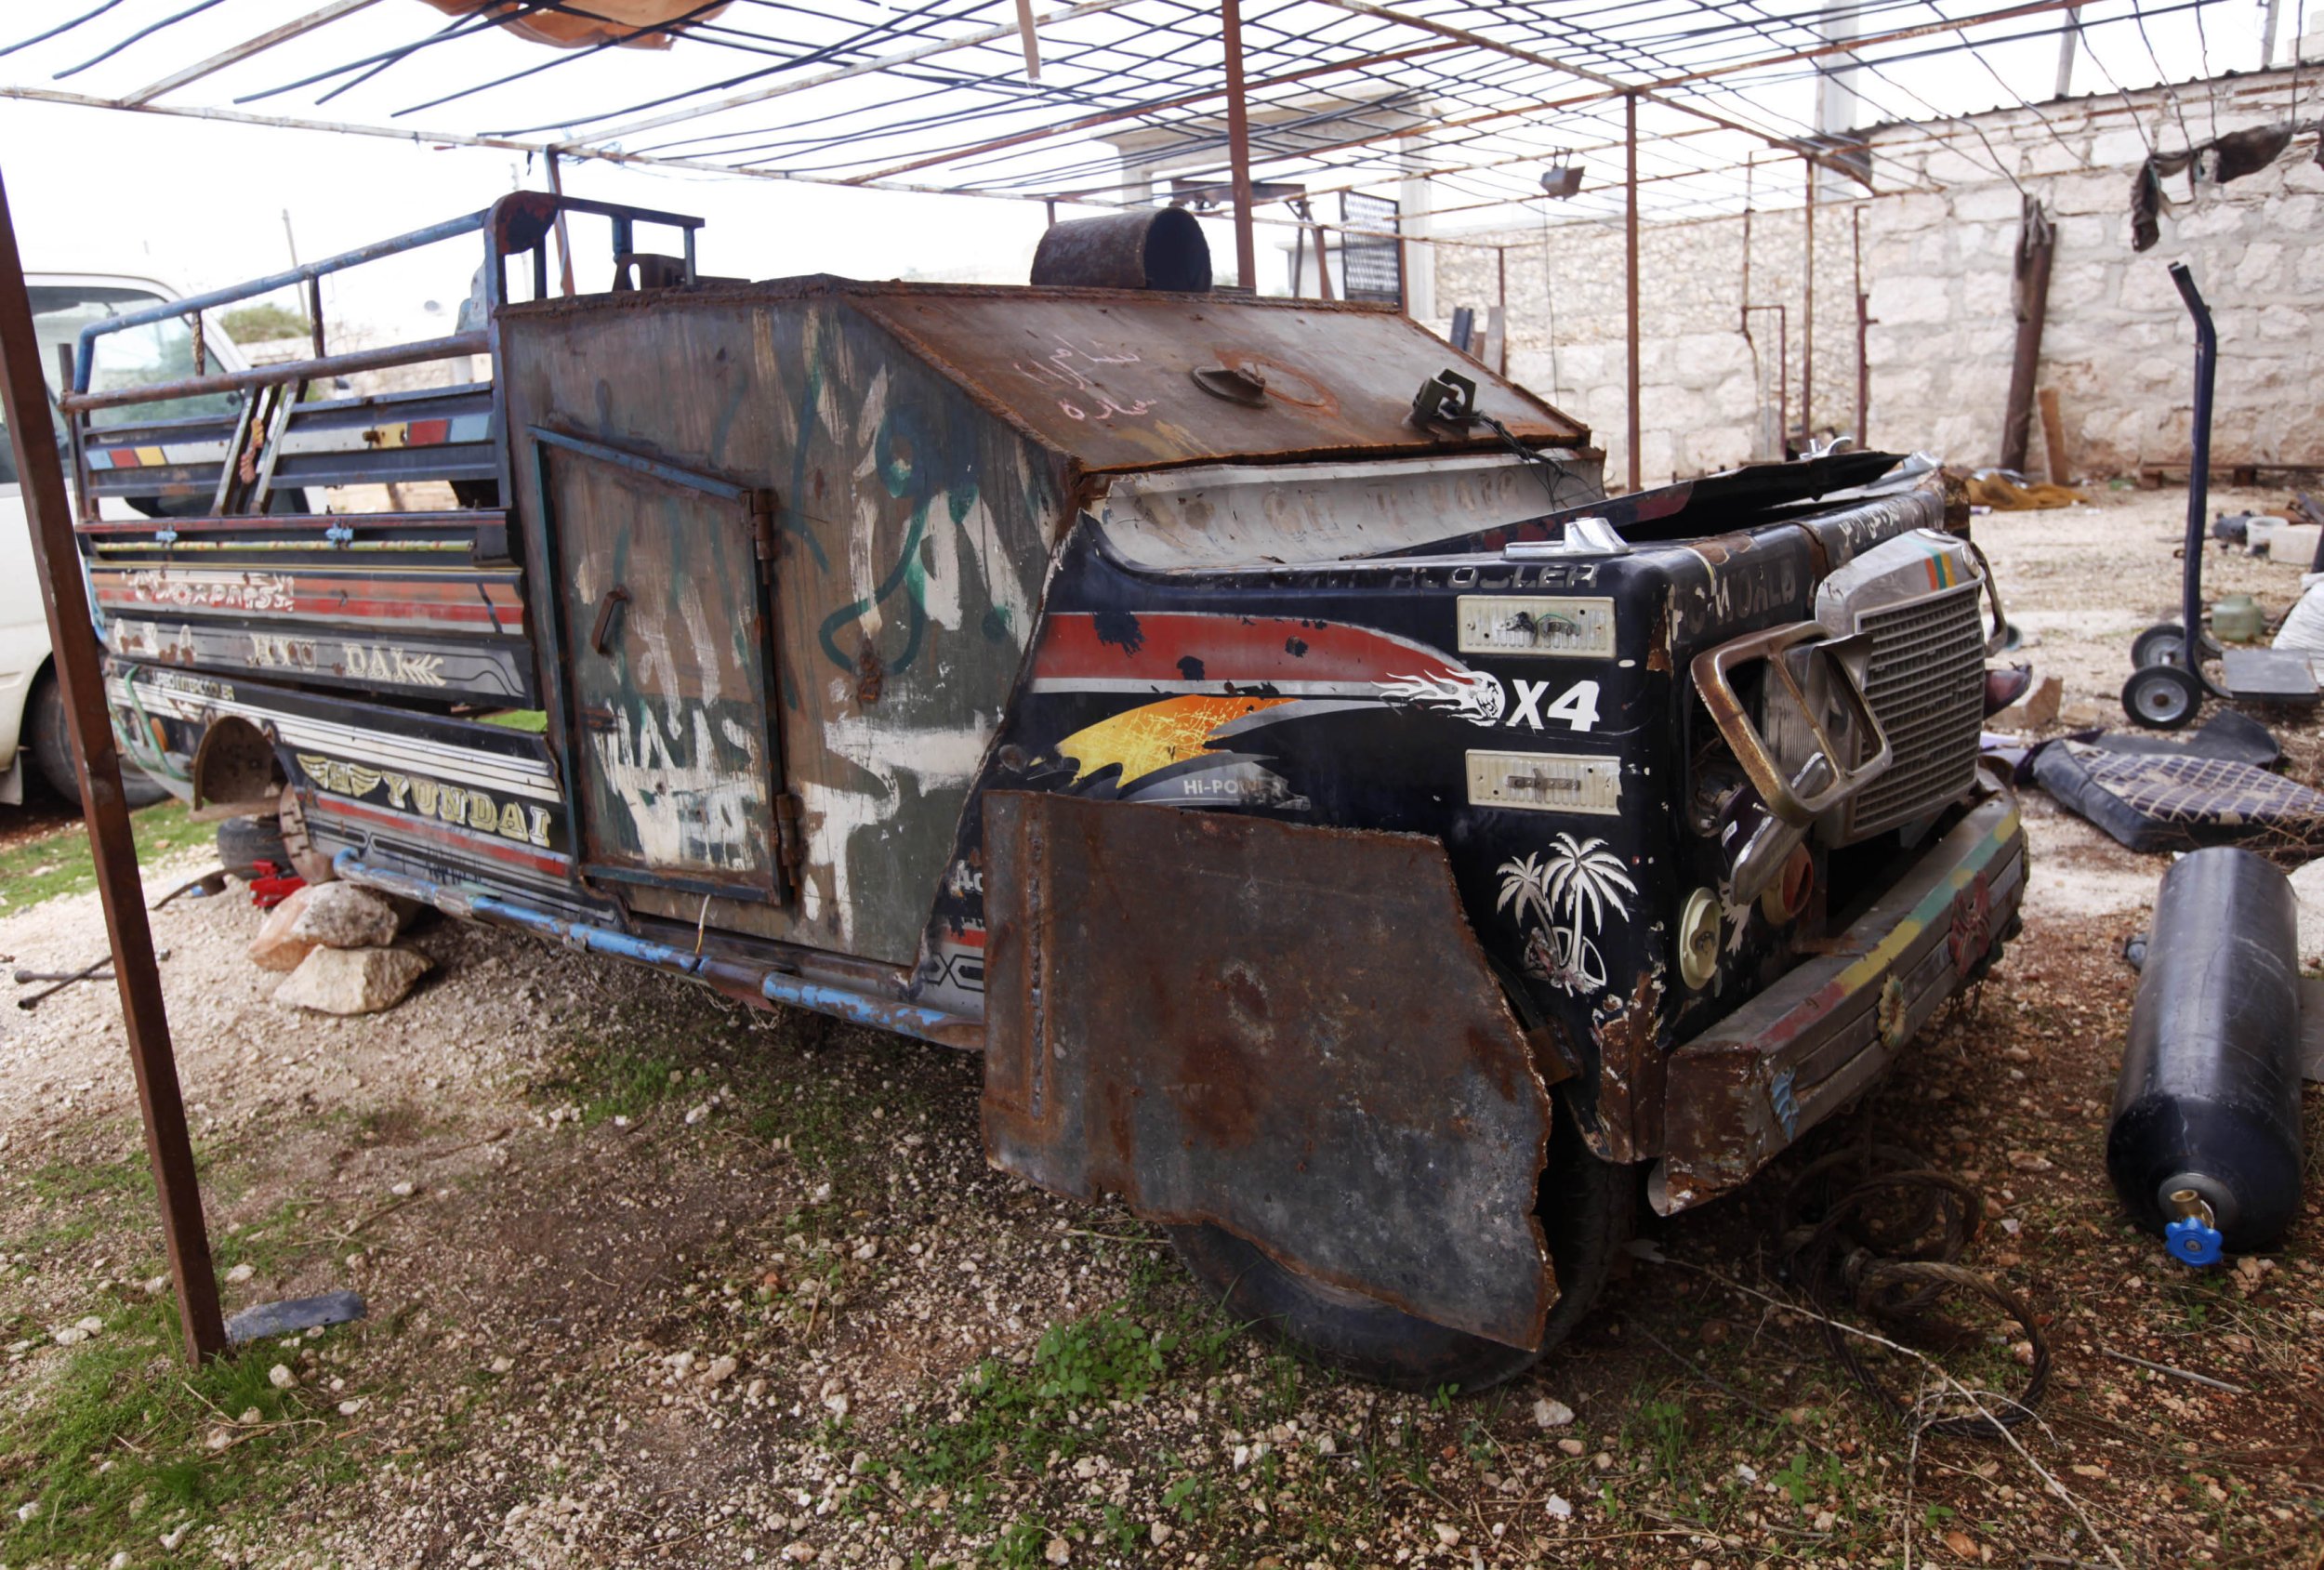 Free Syrian Army vehicle